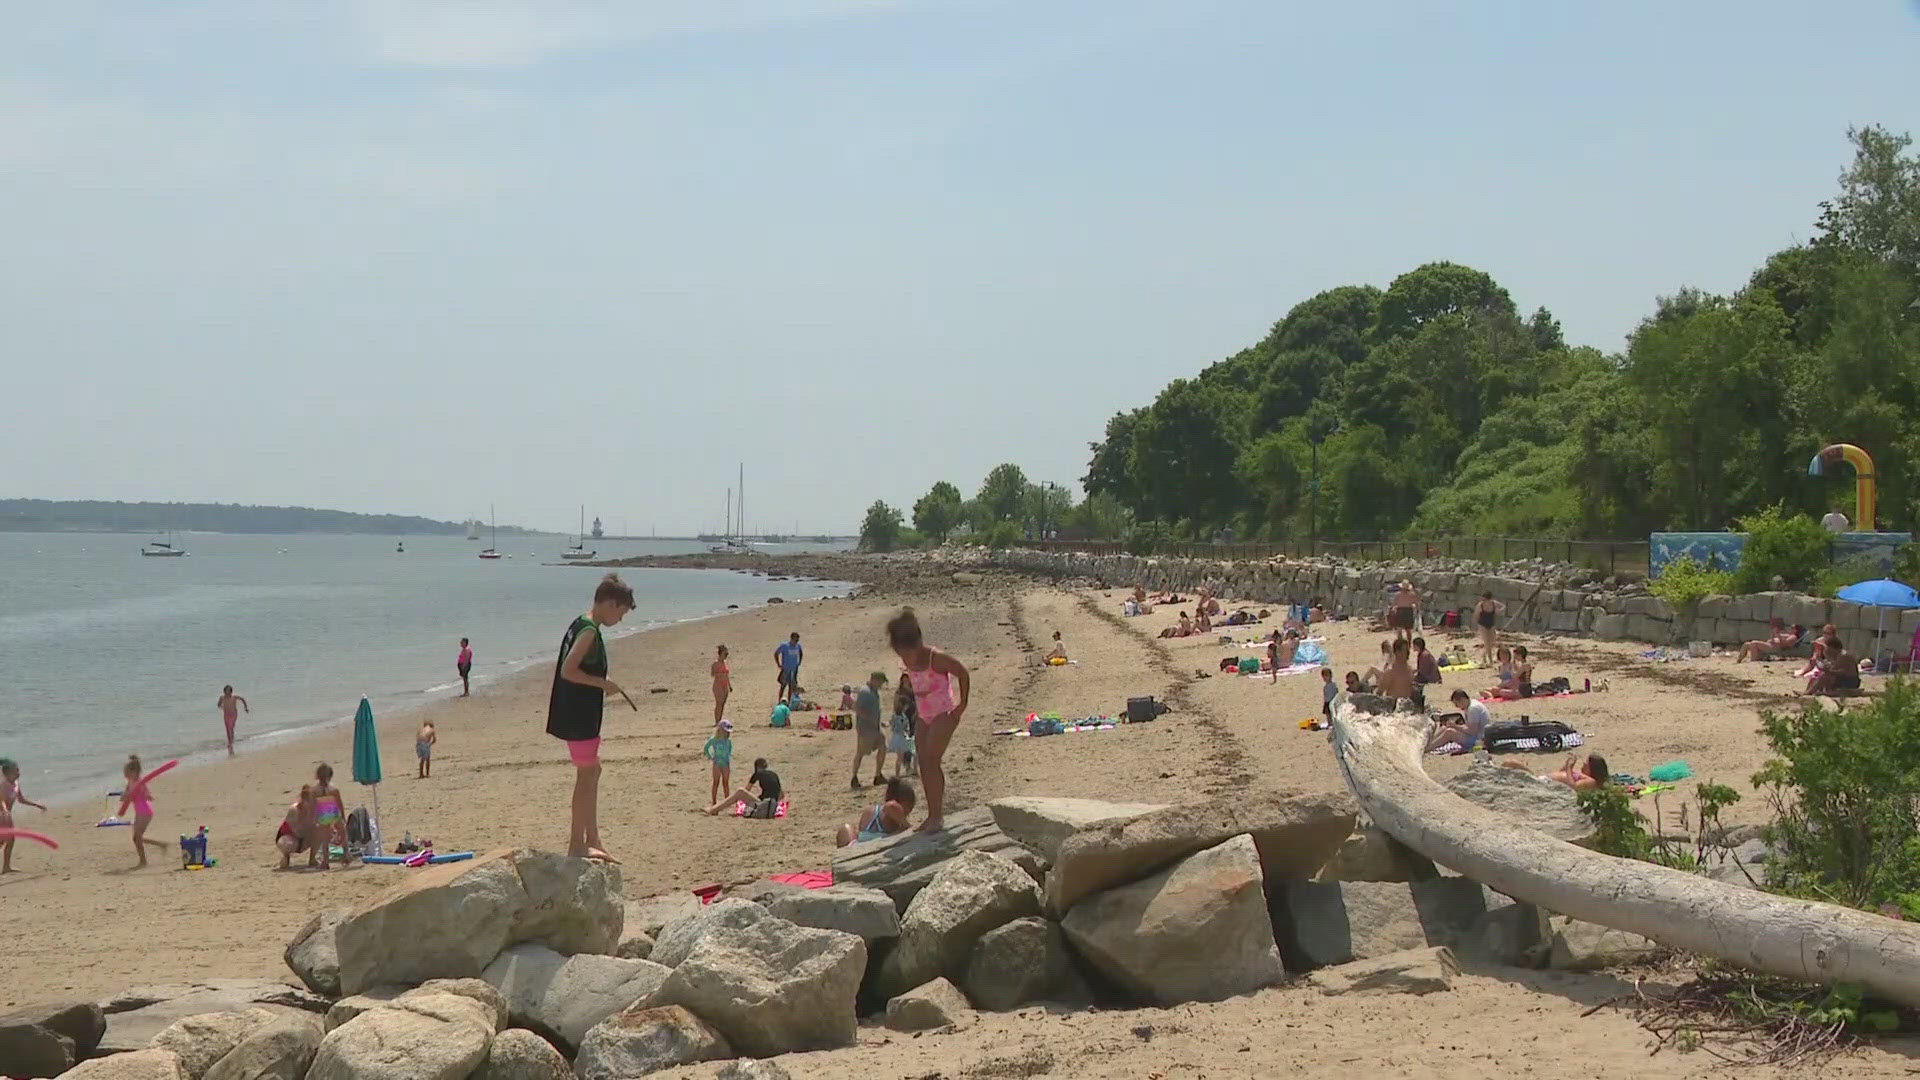 Just this week, beaches in Ogunquit, Kennebunk, Kennebunkport, Portland, and more were flagged for unsafe levels of bacteria found in the water.